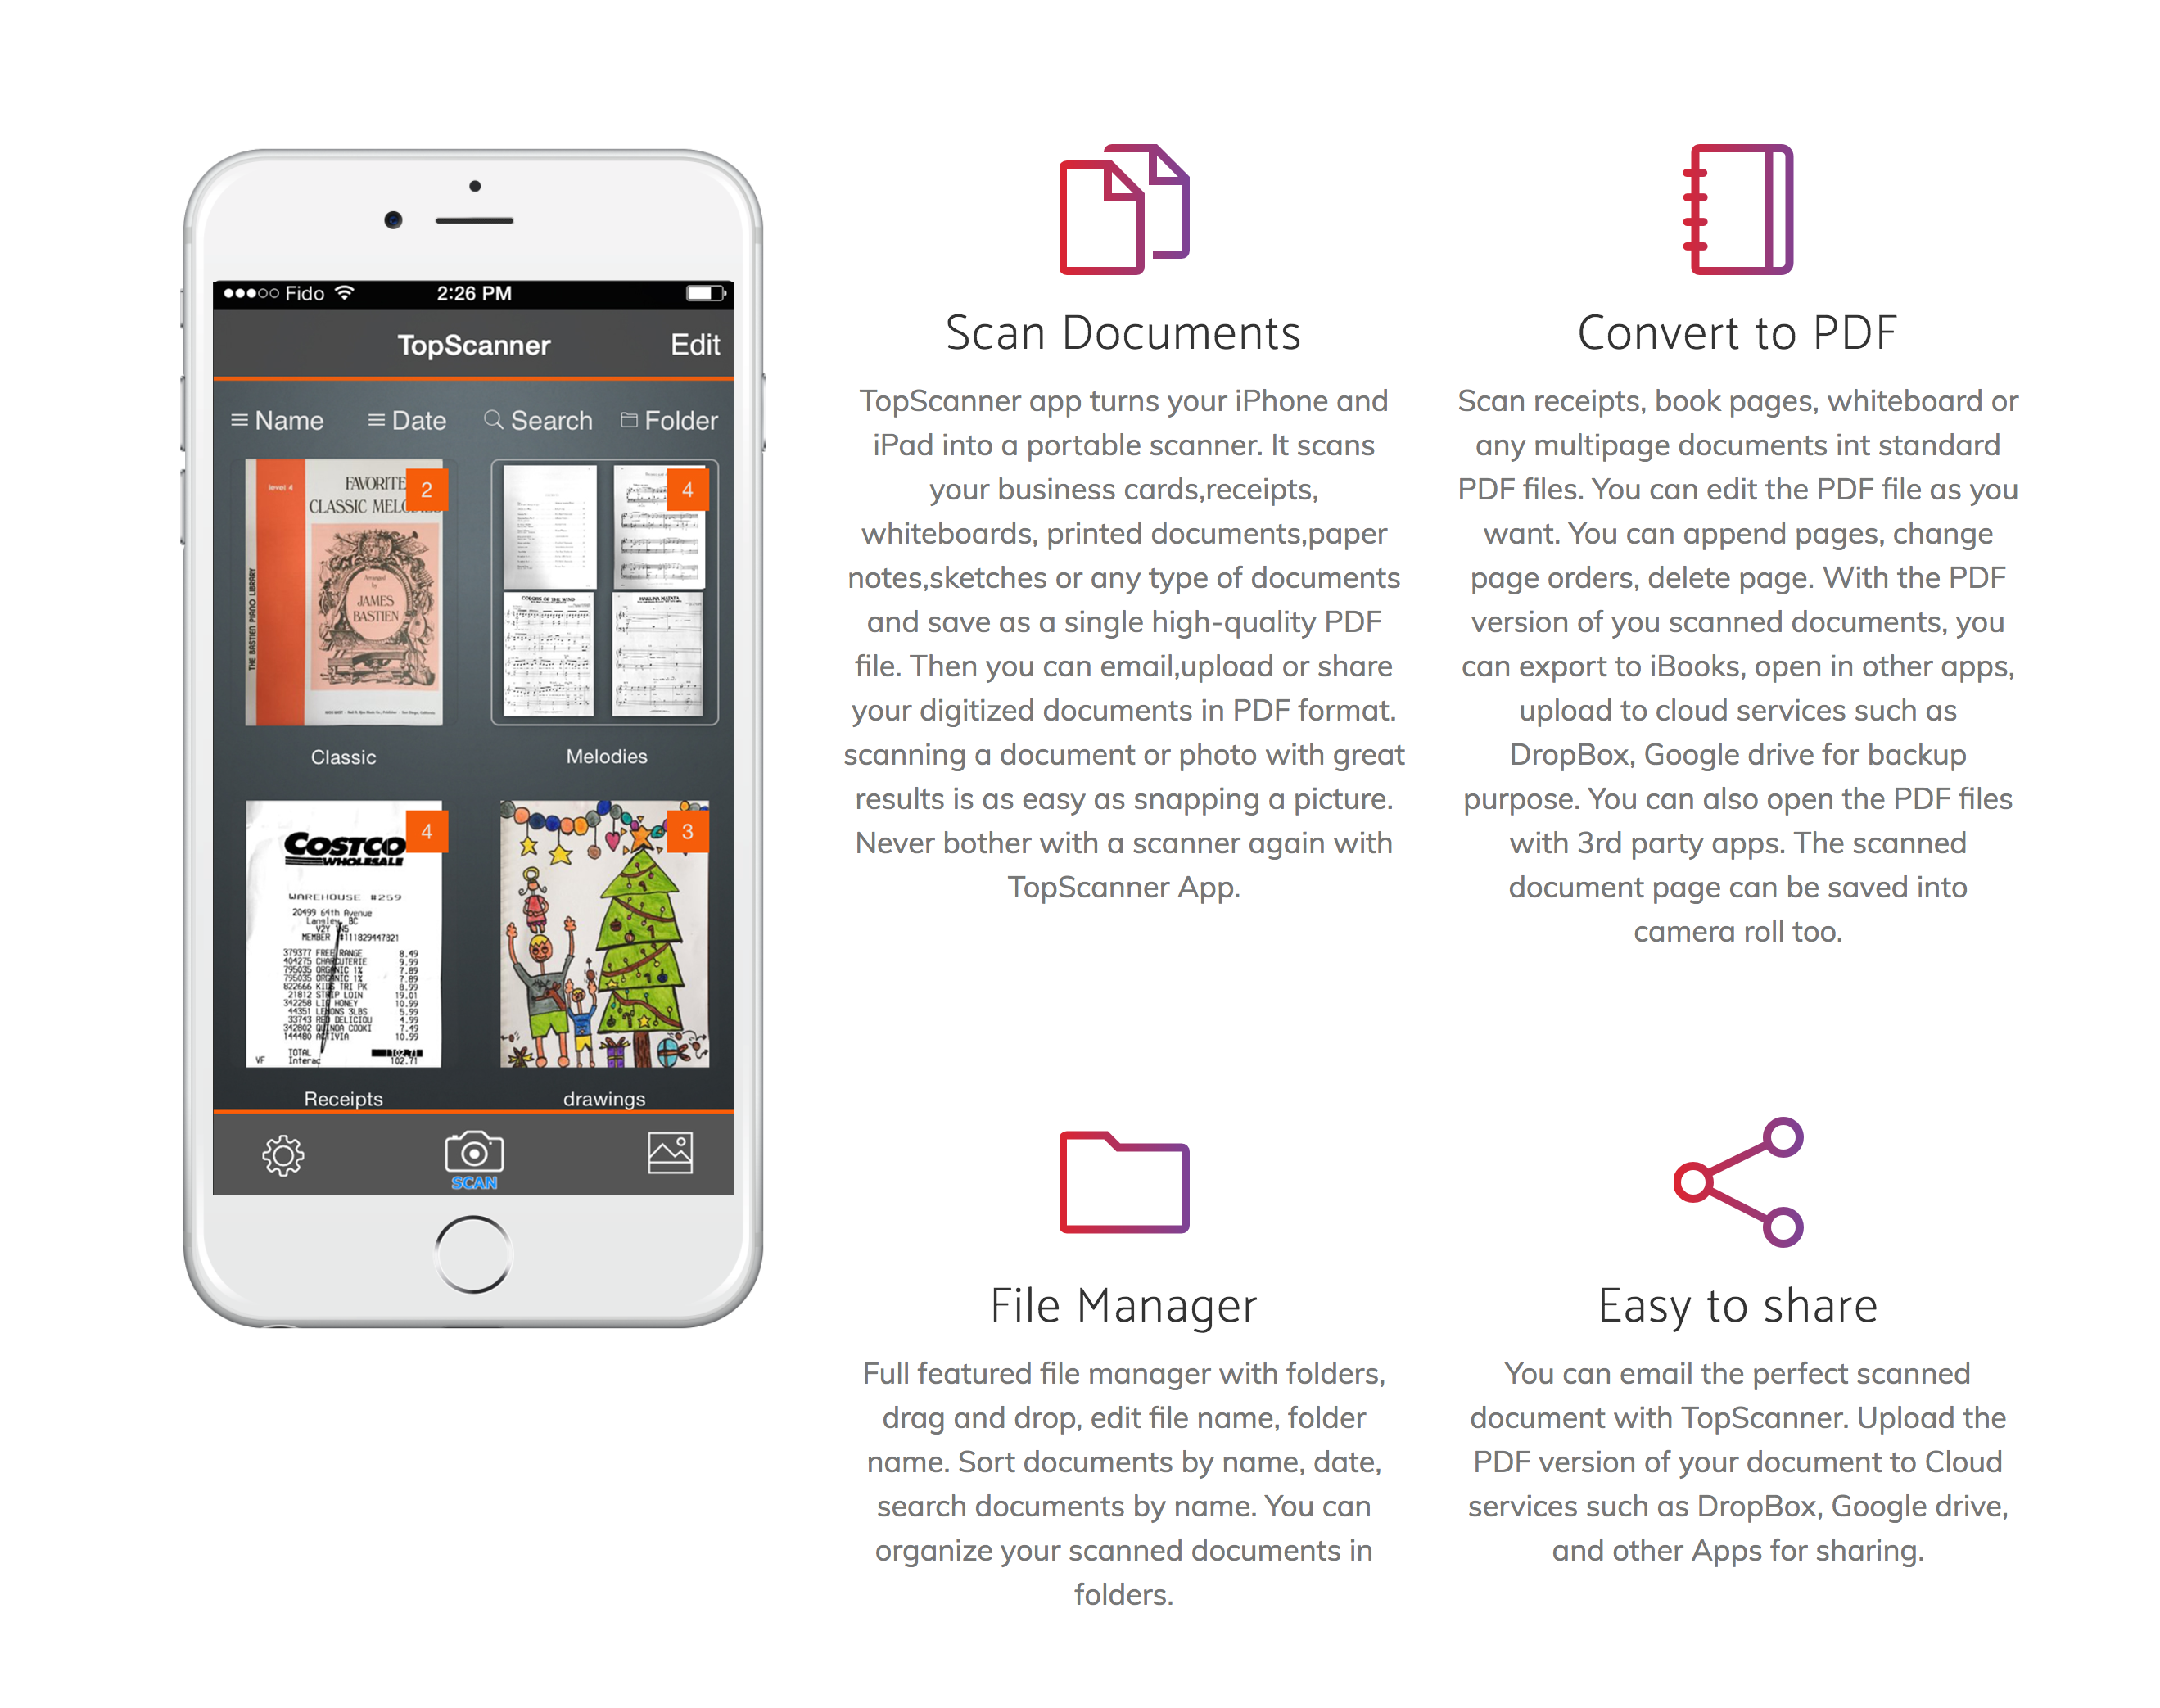 TopScanner PDF app for iPhone and iPad now available for free (Reg. $2